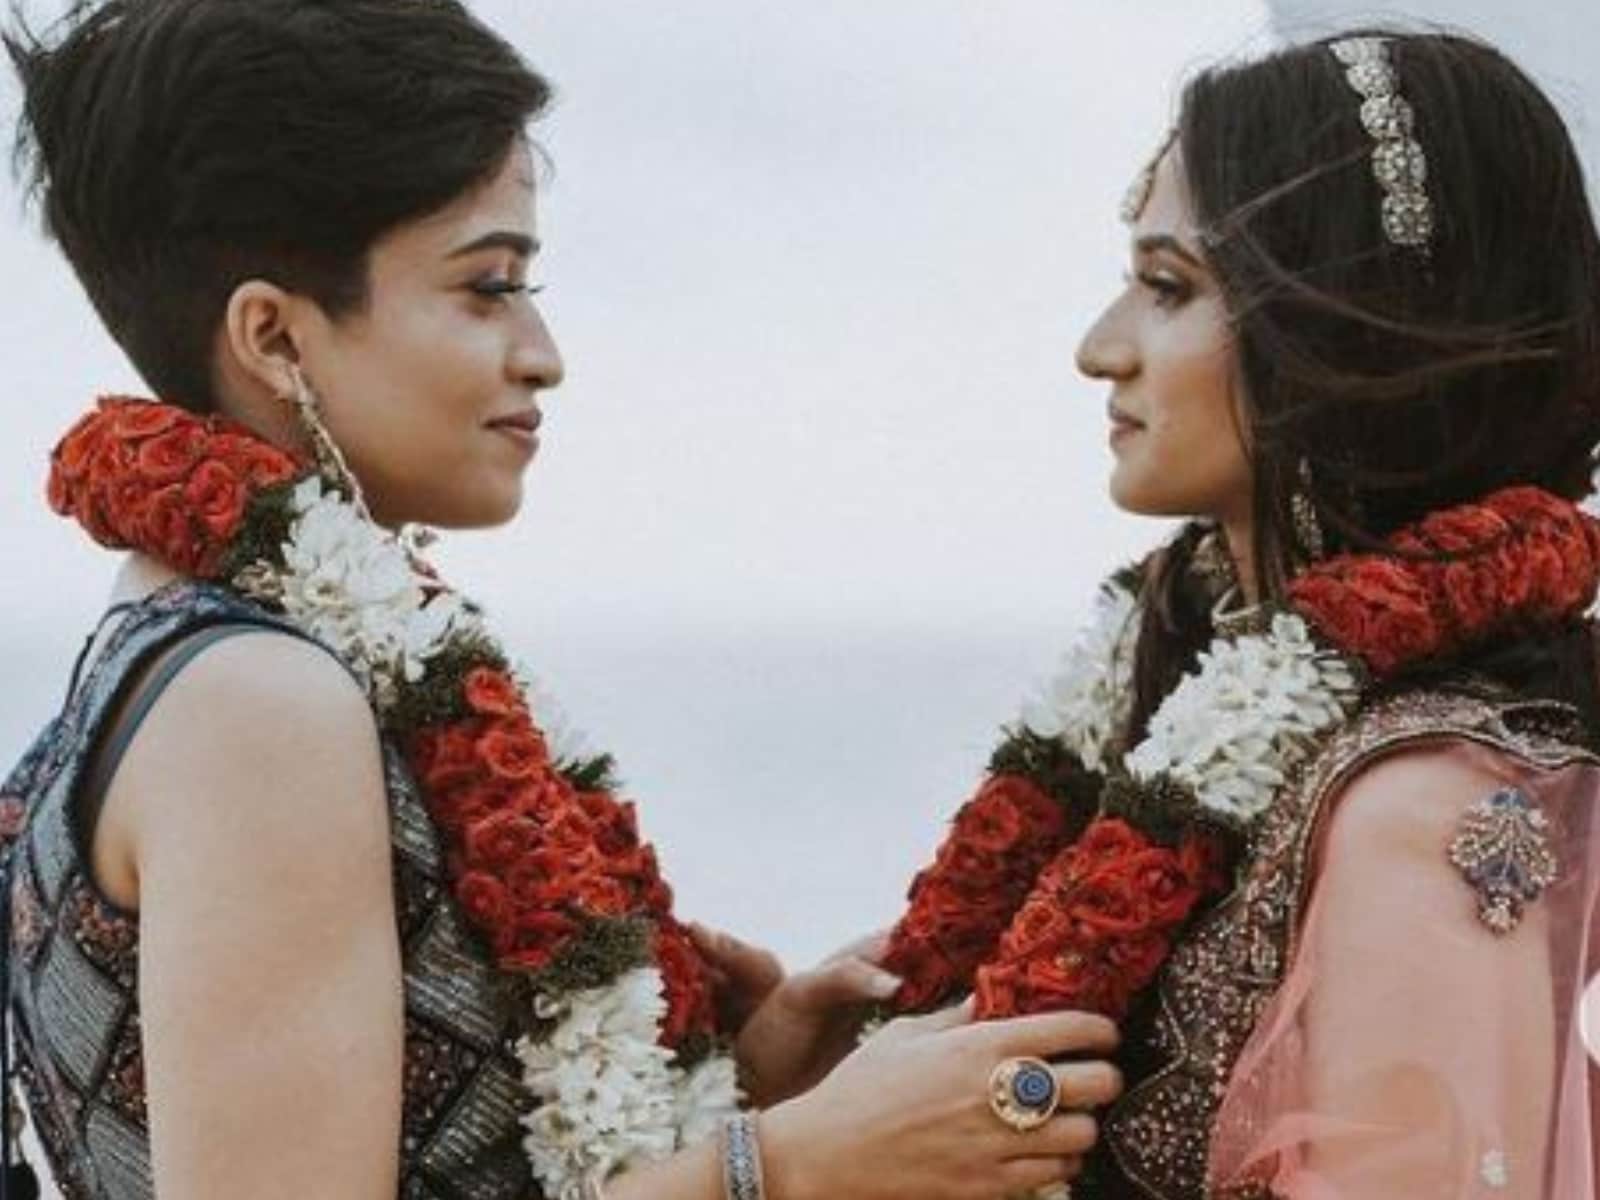 Kerala Teen Lesbian - Kerala Lesbian Couple, Once Separated by Families, Turns Brides in Wedding  Photoshoot